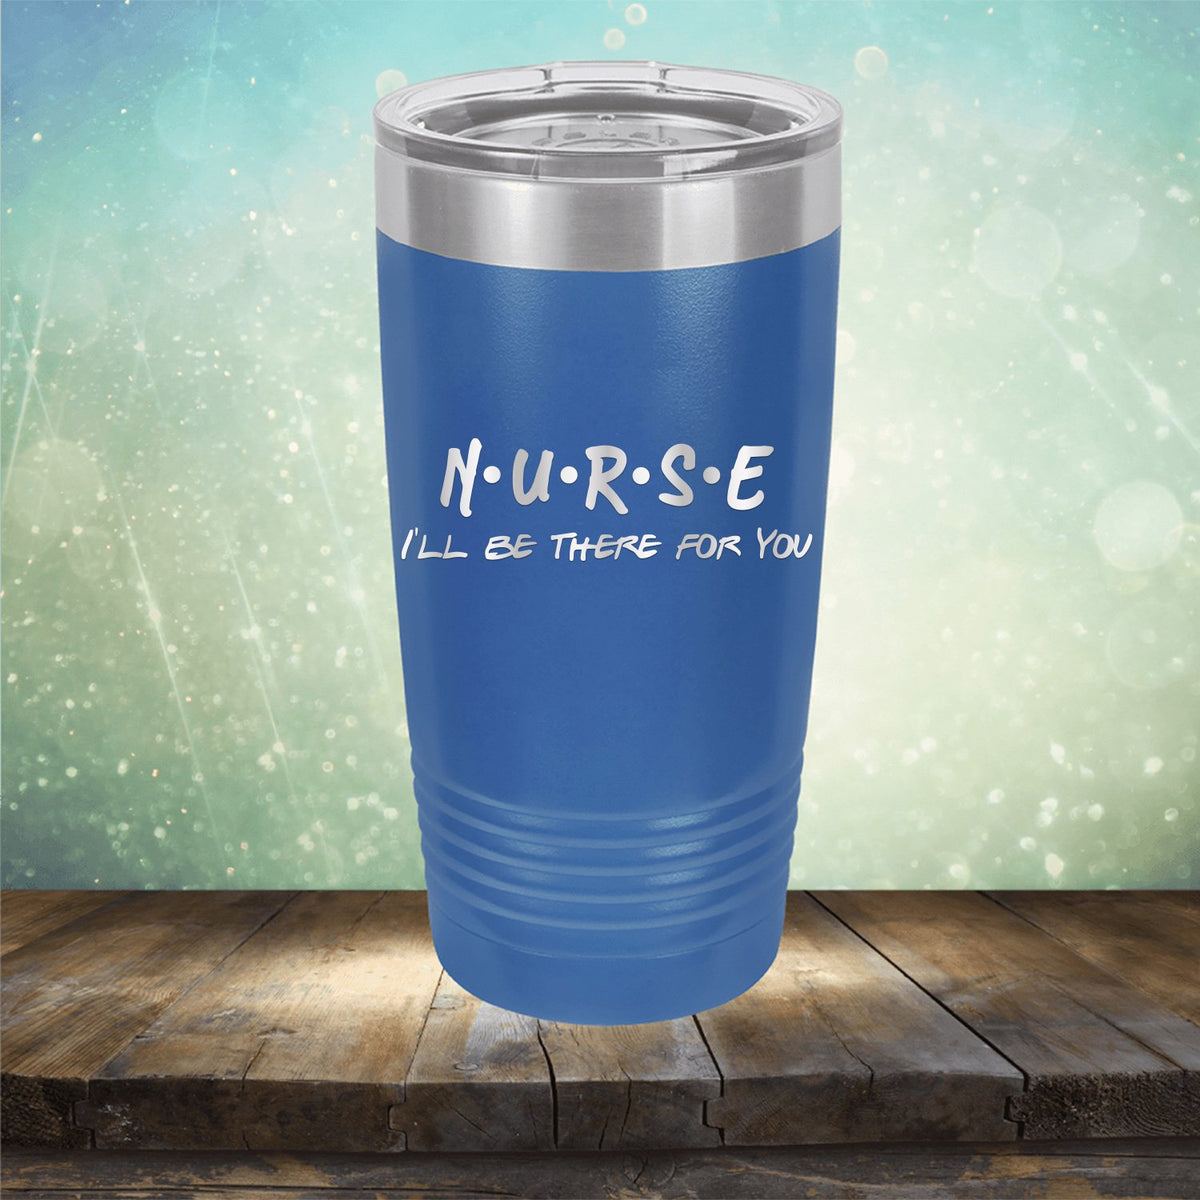 Nurse Be There For You